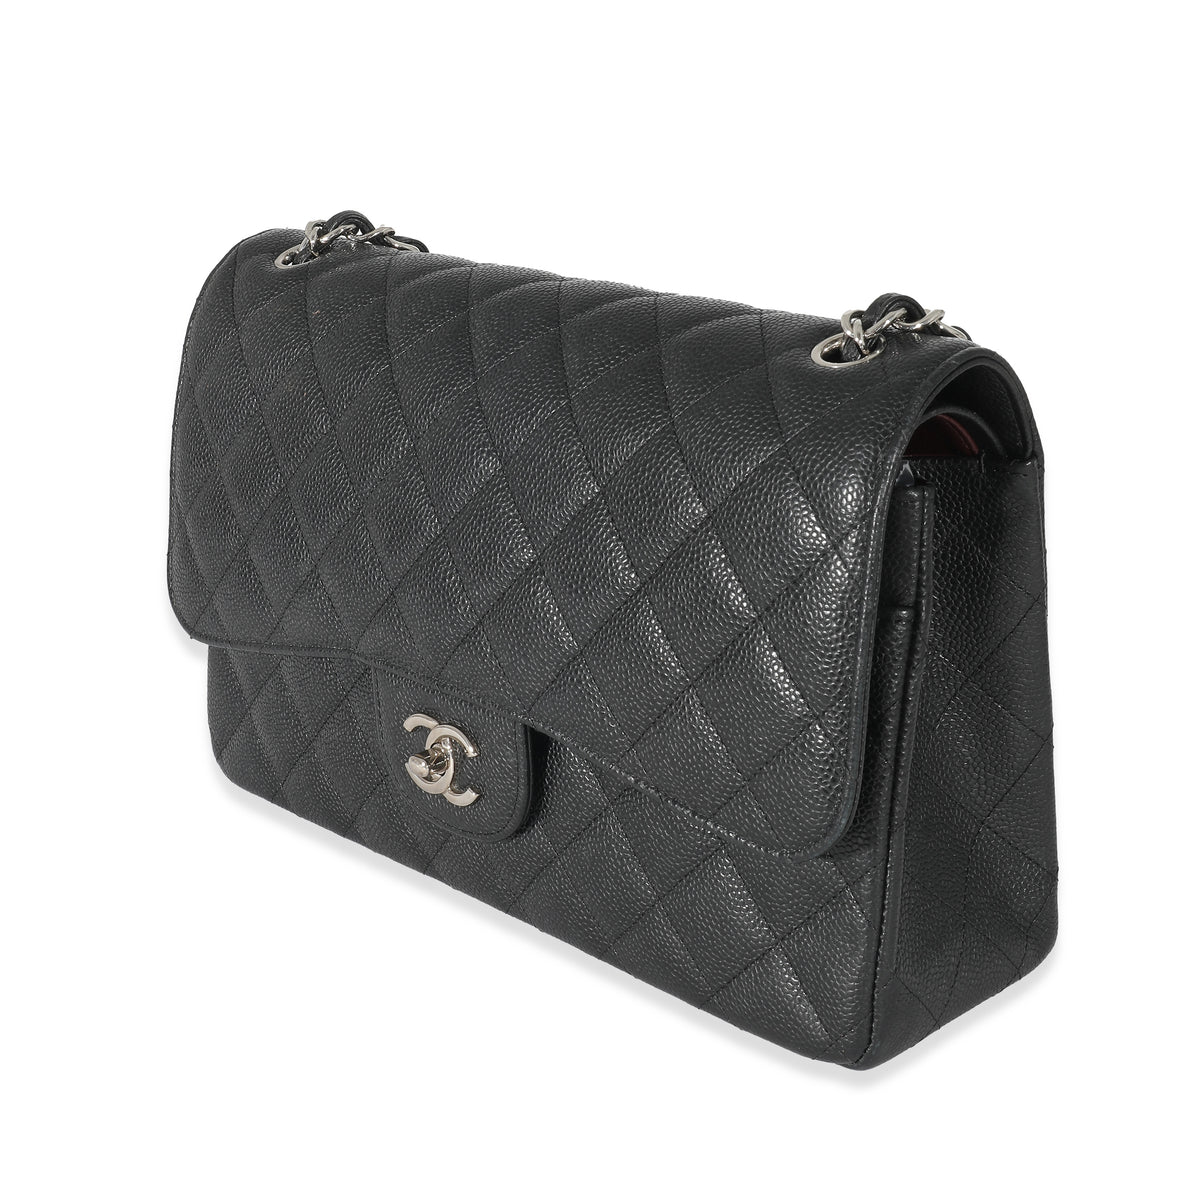 Chanel Black Quilted Caviar Jumbo Double Flap Bag, myGemma, FR